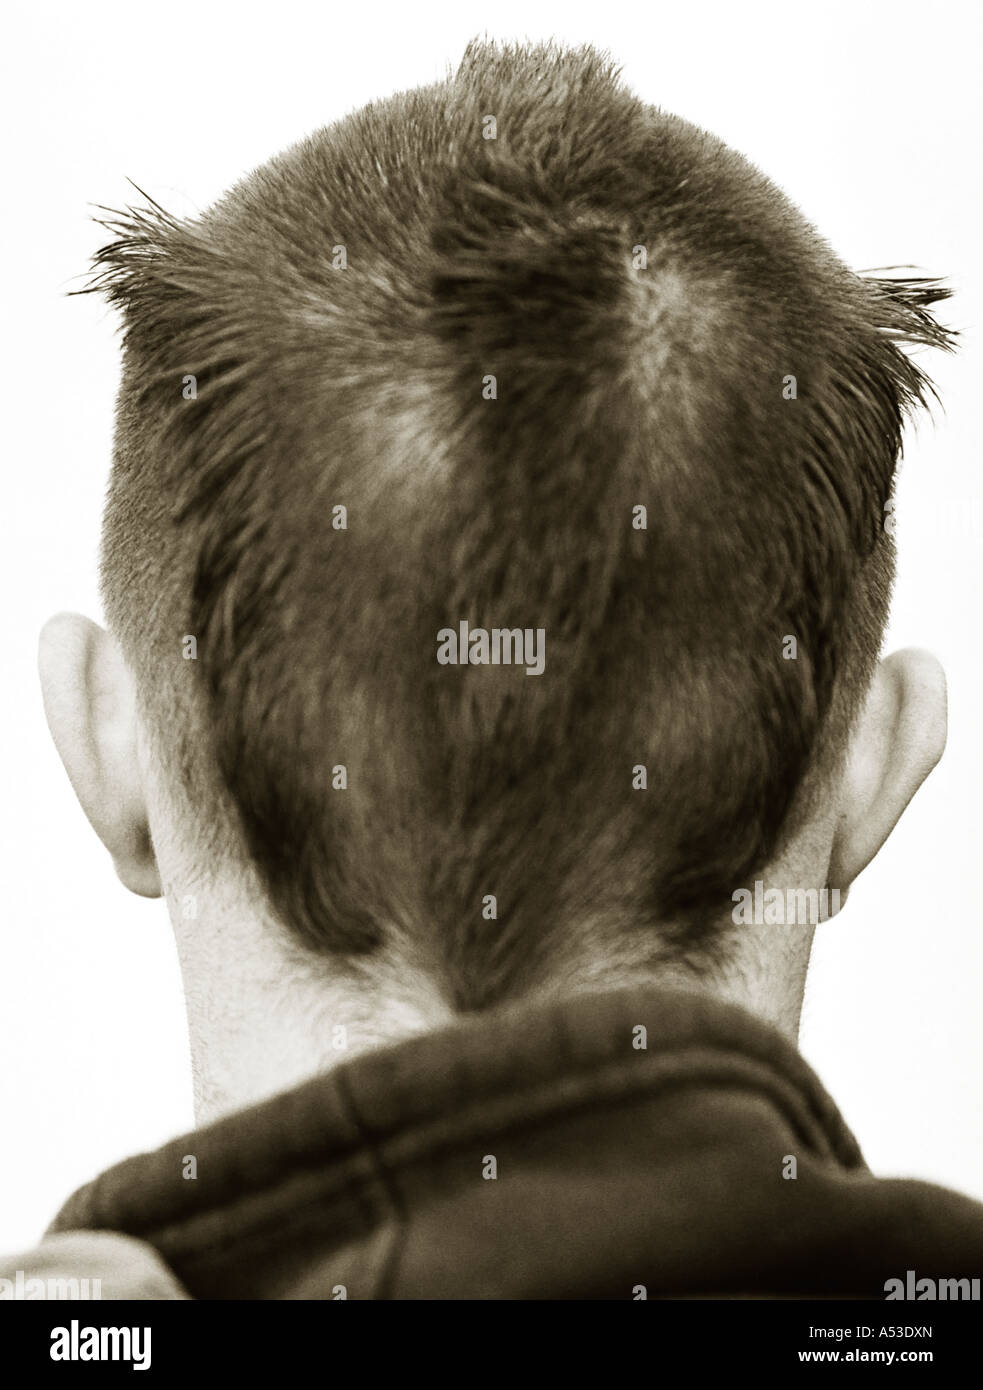 Tinted black and white portrait of back of head of young man. Stock Photo